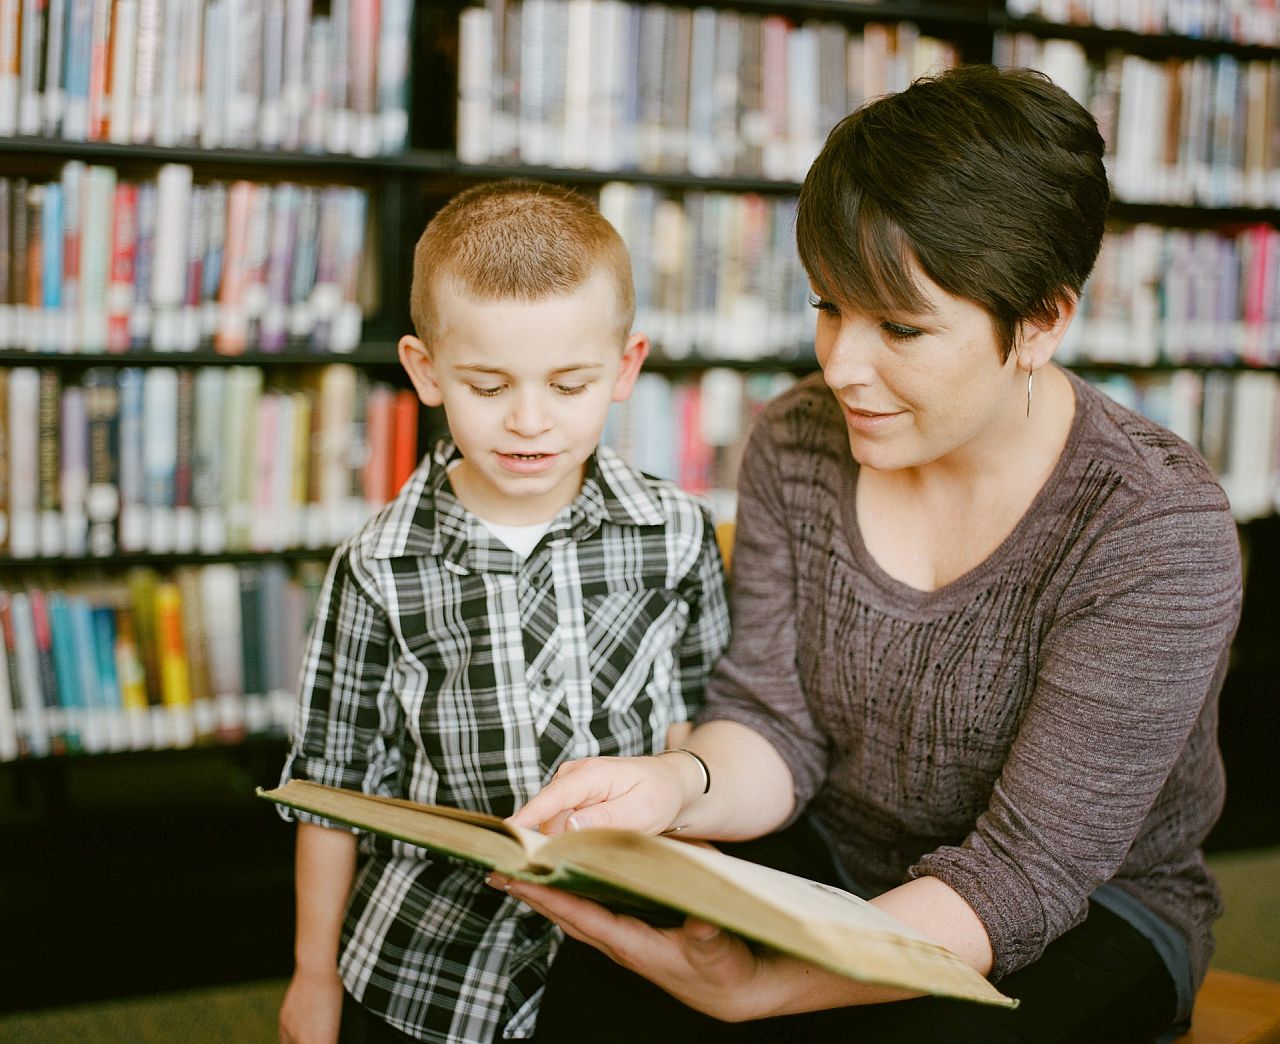 Adult helping child read in a library; nano-learning concept.